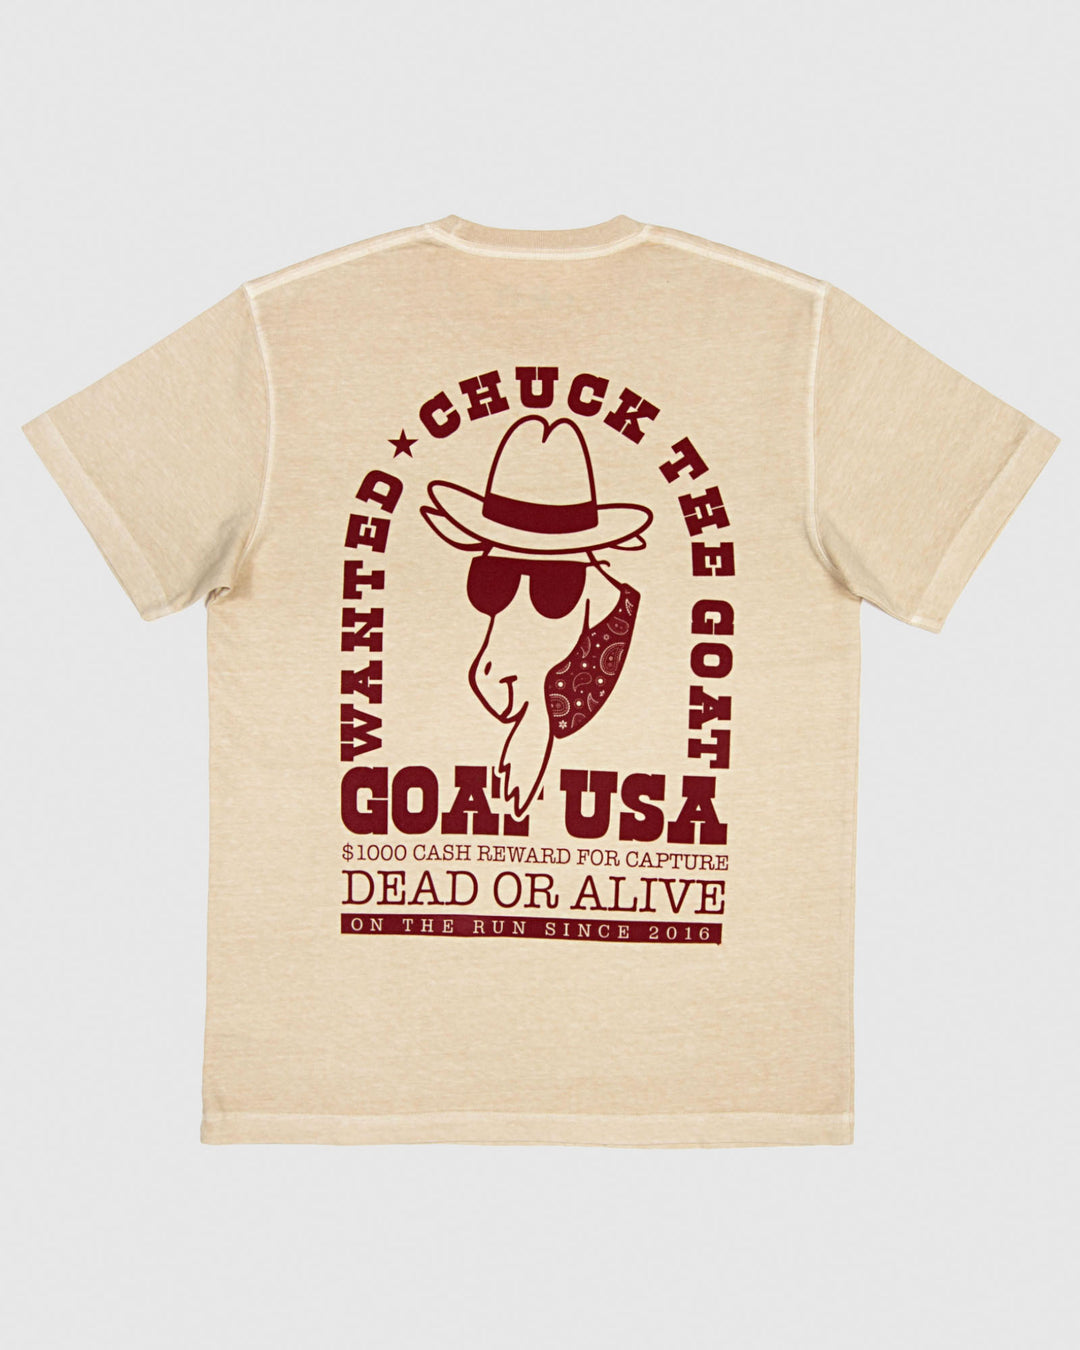 Sandshell-colored t-shirt with "wanted poster" style design with goat  as an outlaw 